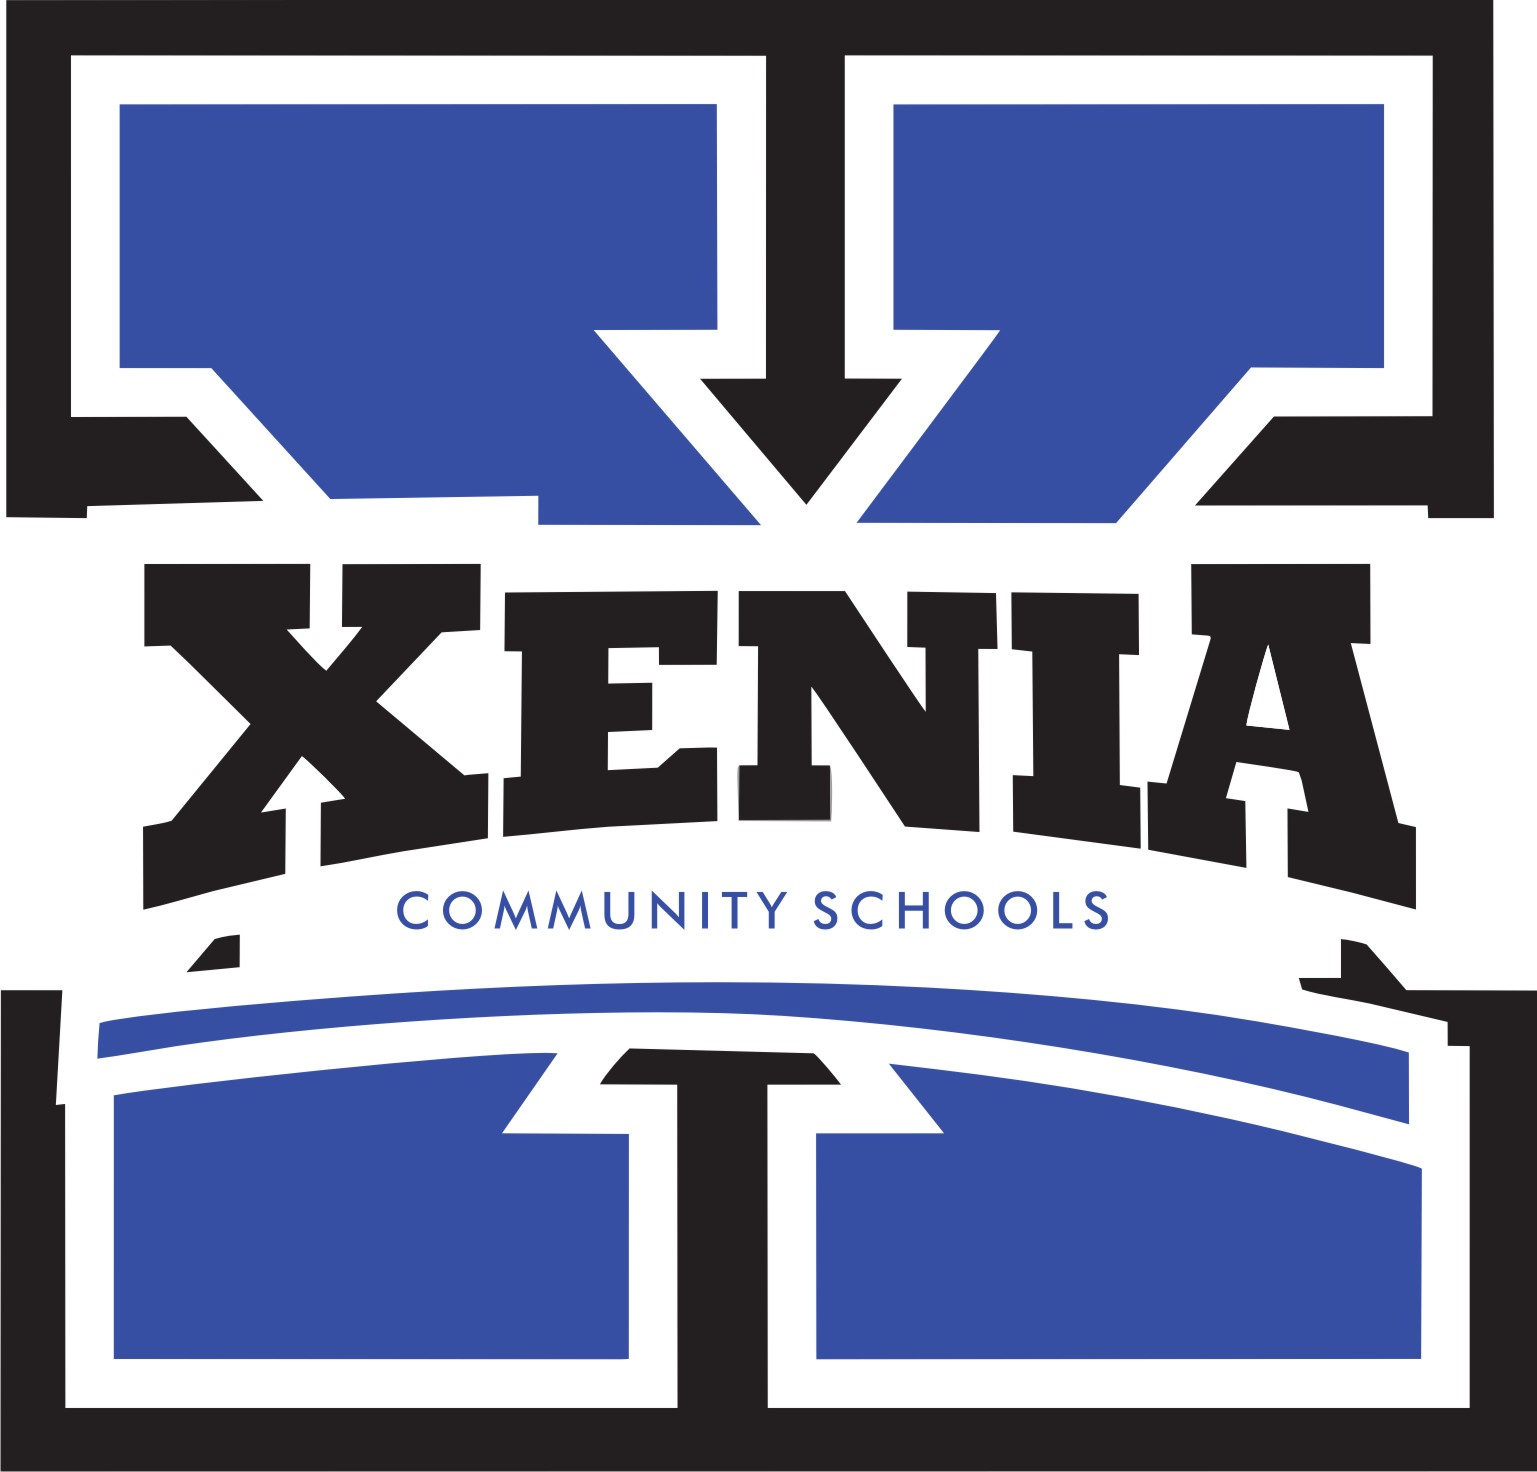 Provide your opinion on Xenia School's building plan options